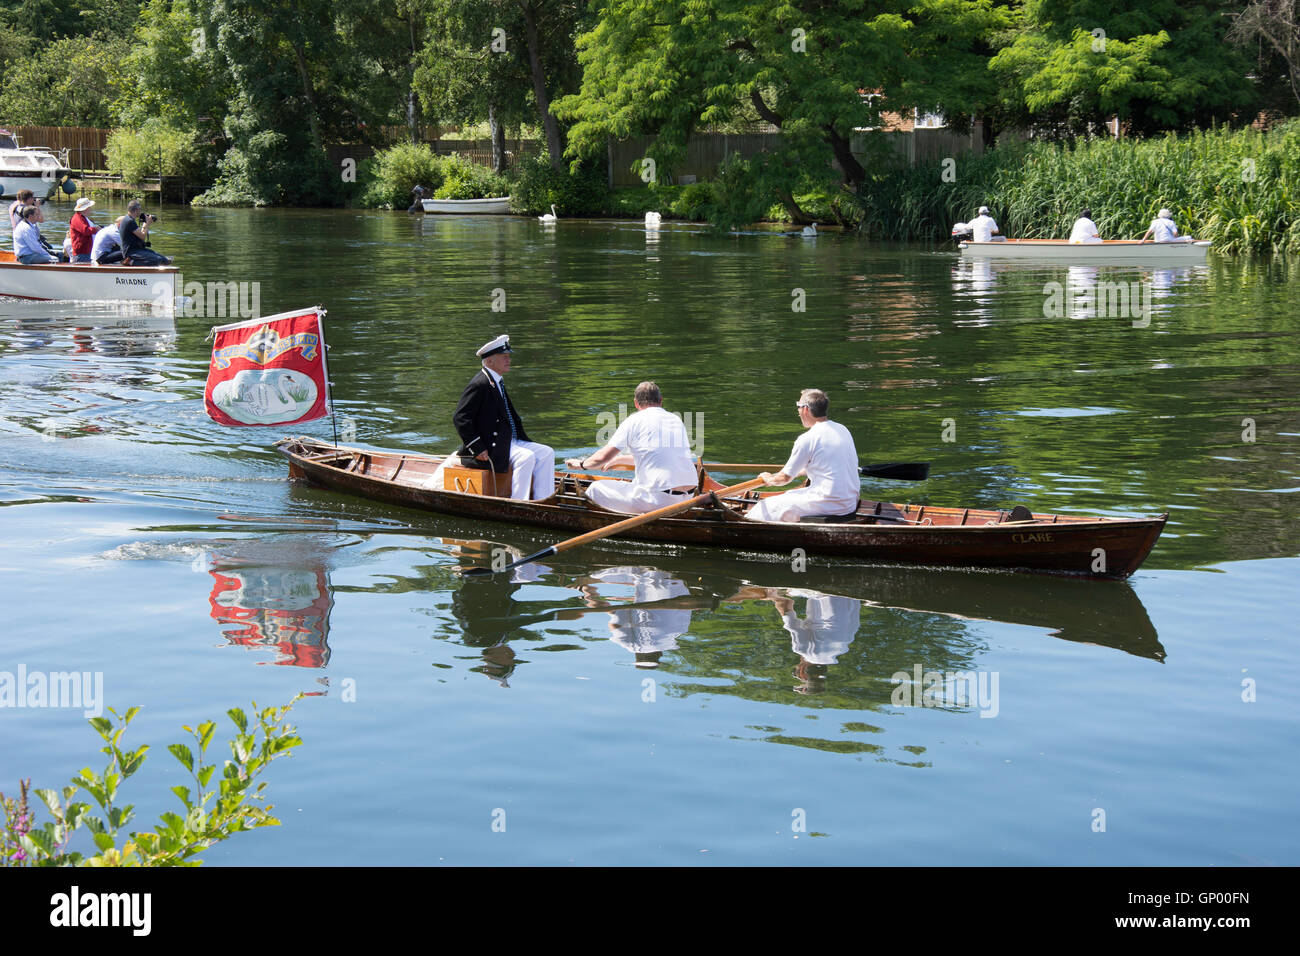 Swan Upping boat and skiff on Thames River at Lalham Reach, Laleham, Surrey, England, United Kingdom Stock Photo